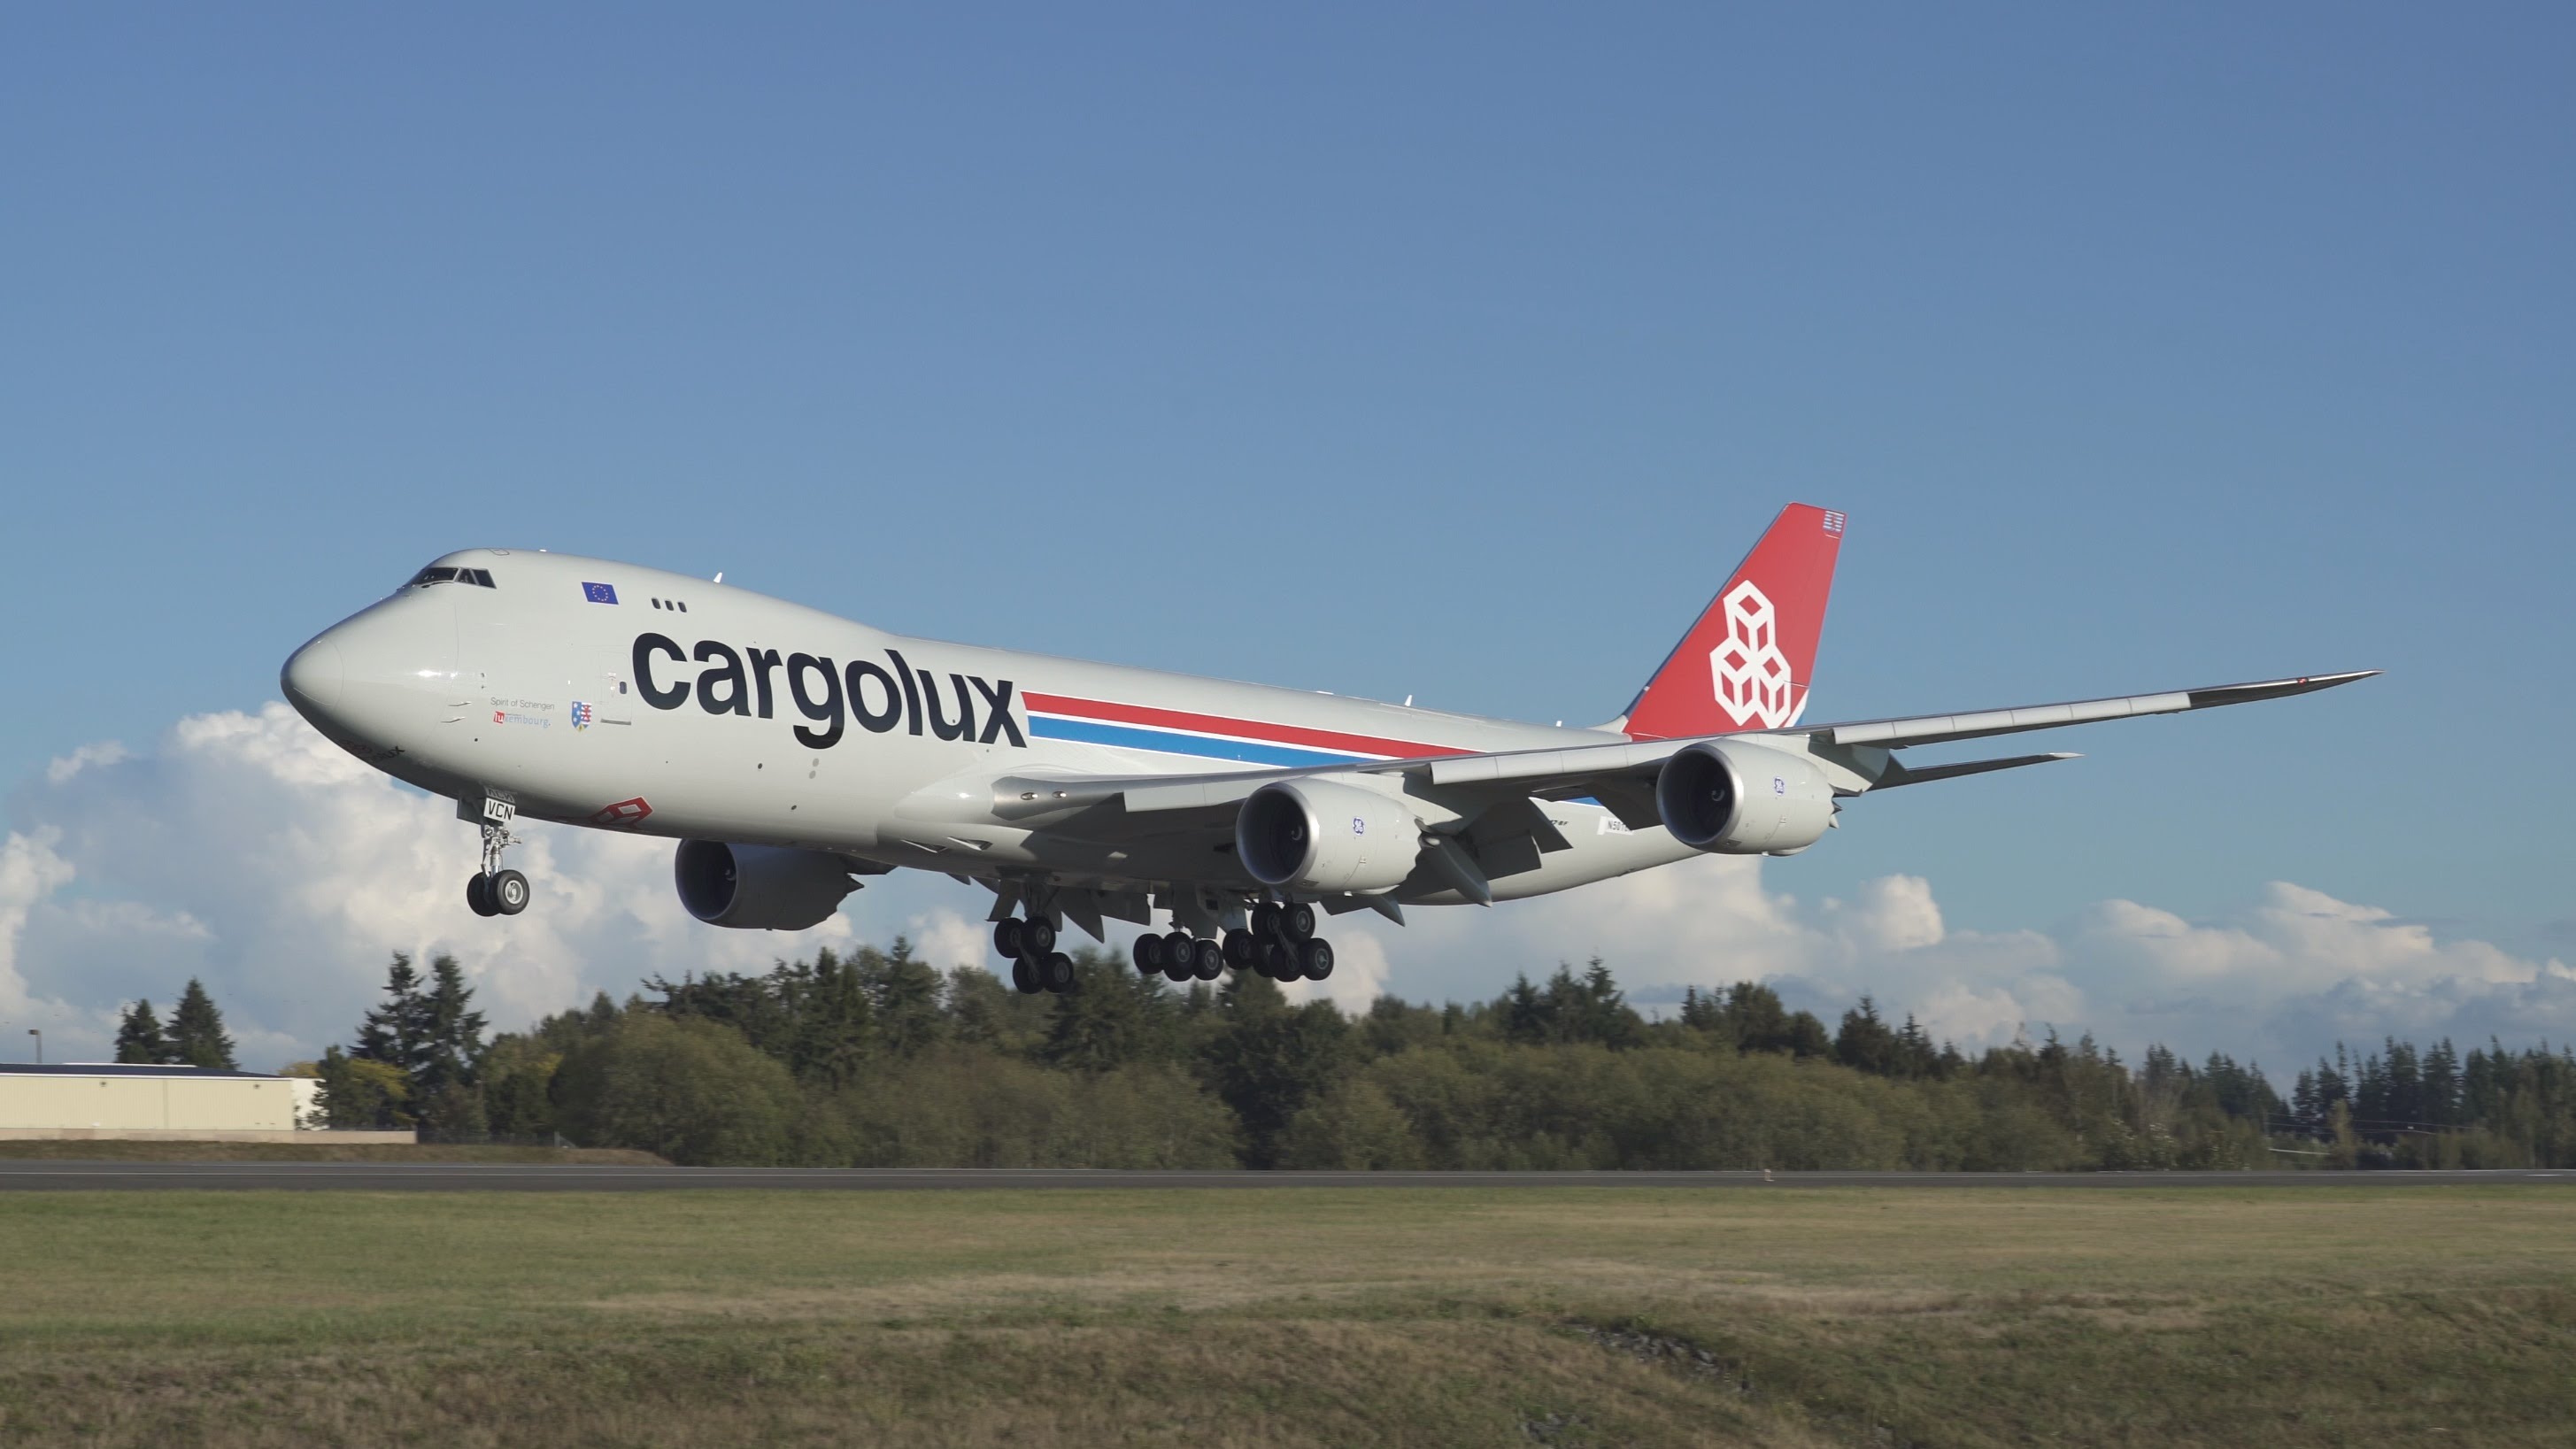 Cargolux calling two new destinations in Africa